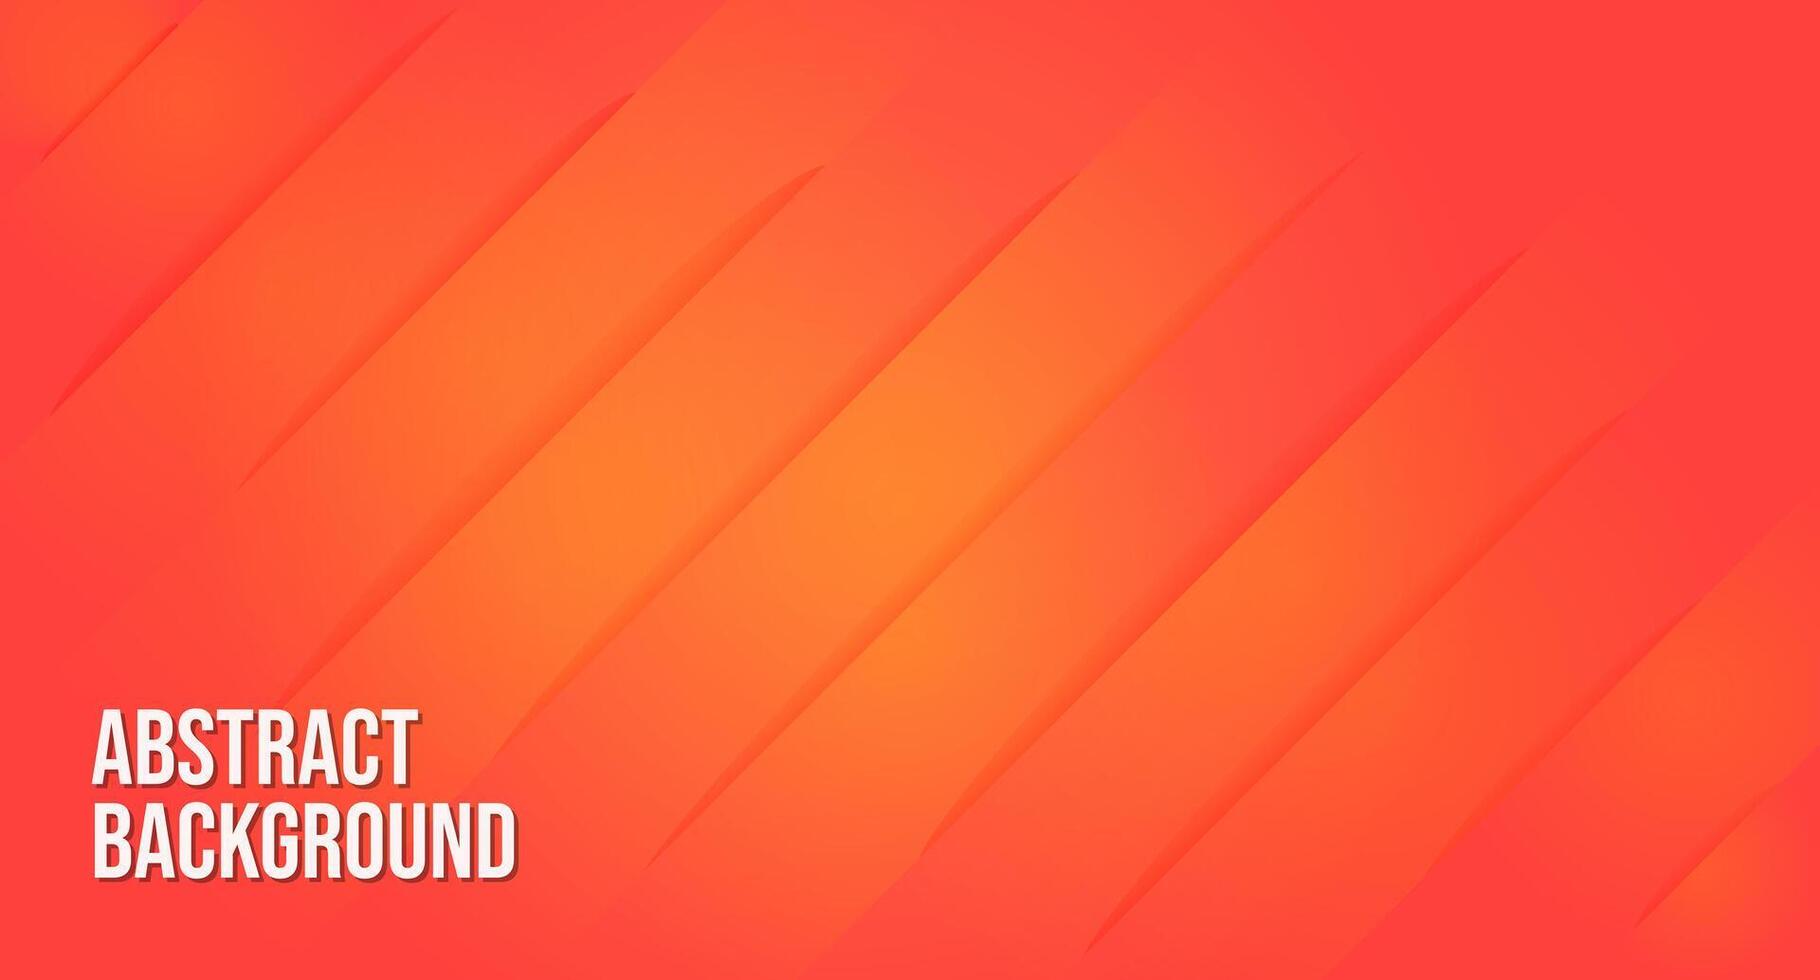 Abstract minimalist line background, vector illustration of red stripes with an orange gradient, ideal for poster, banner, ad, presentation, and motion design backgrounds.